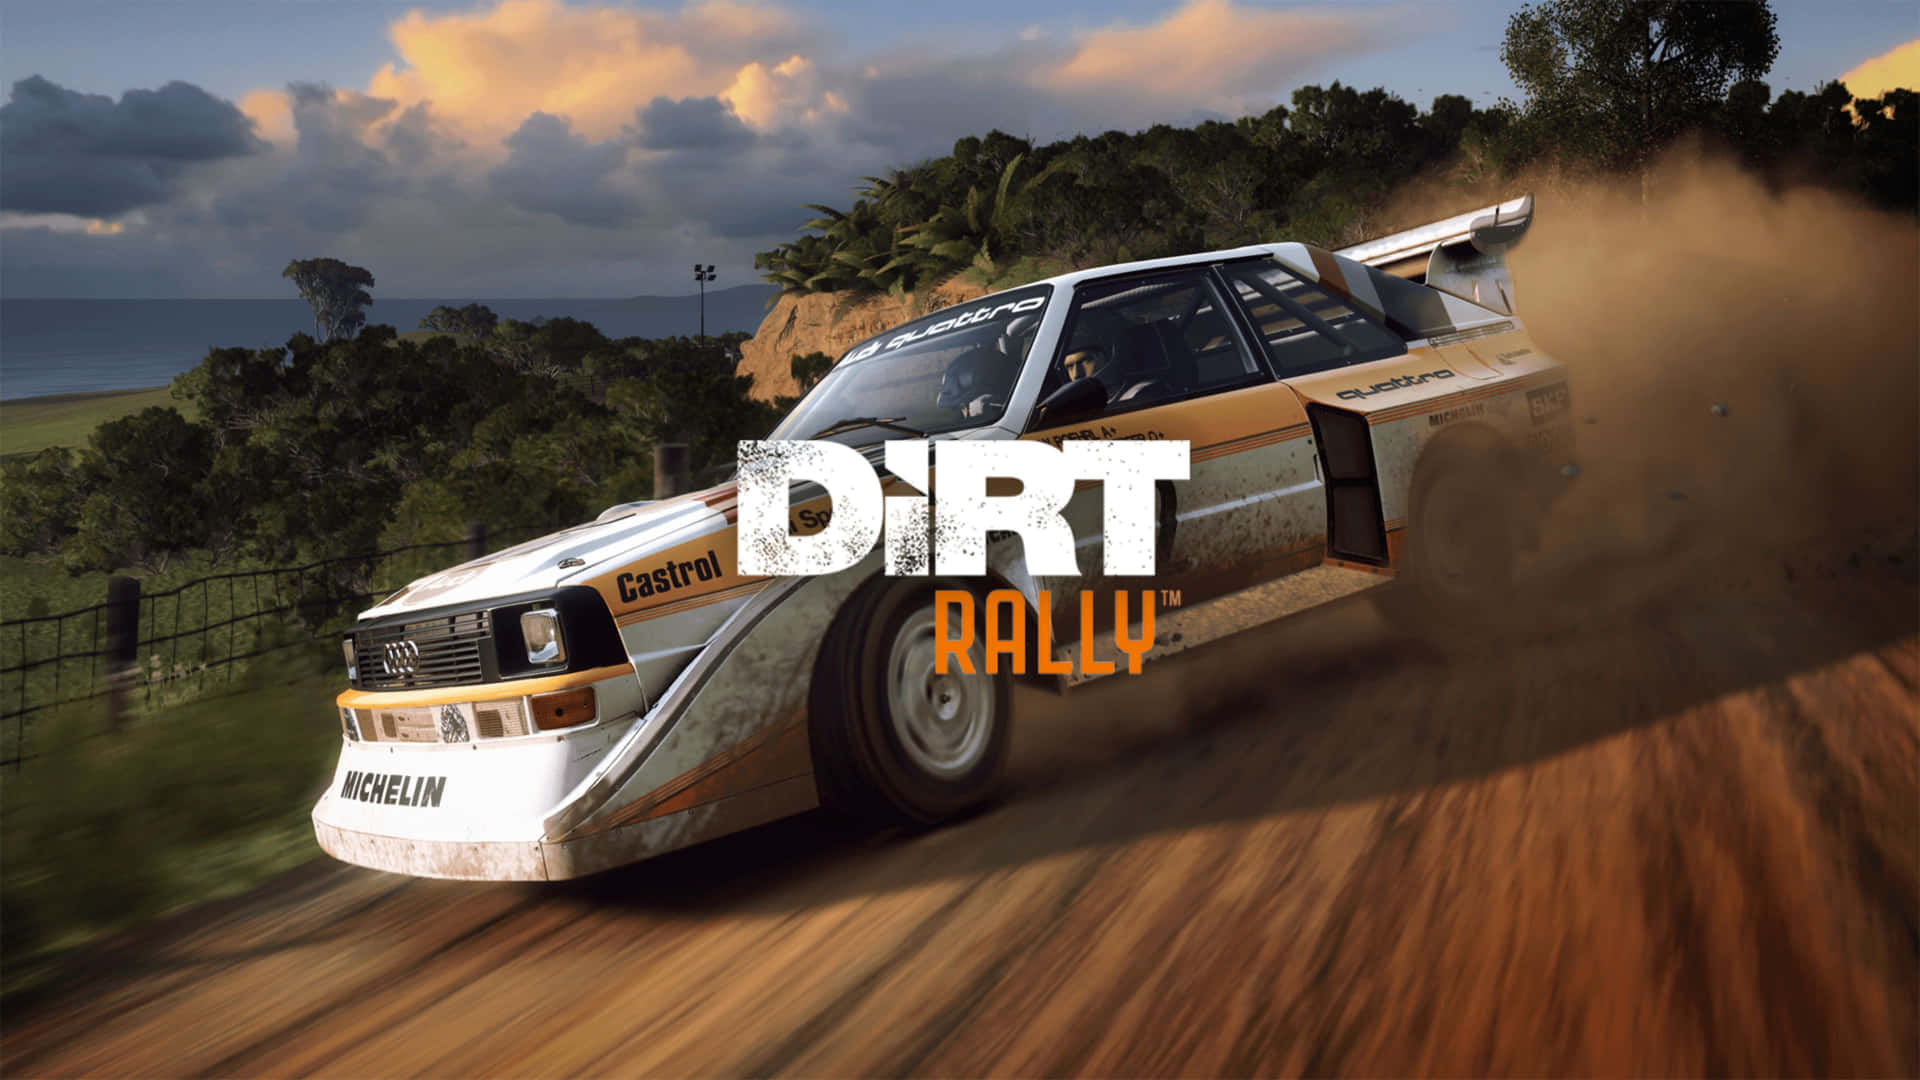 Race through the dirt with the 4k Dirt Rally!